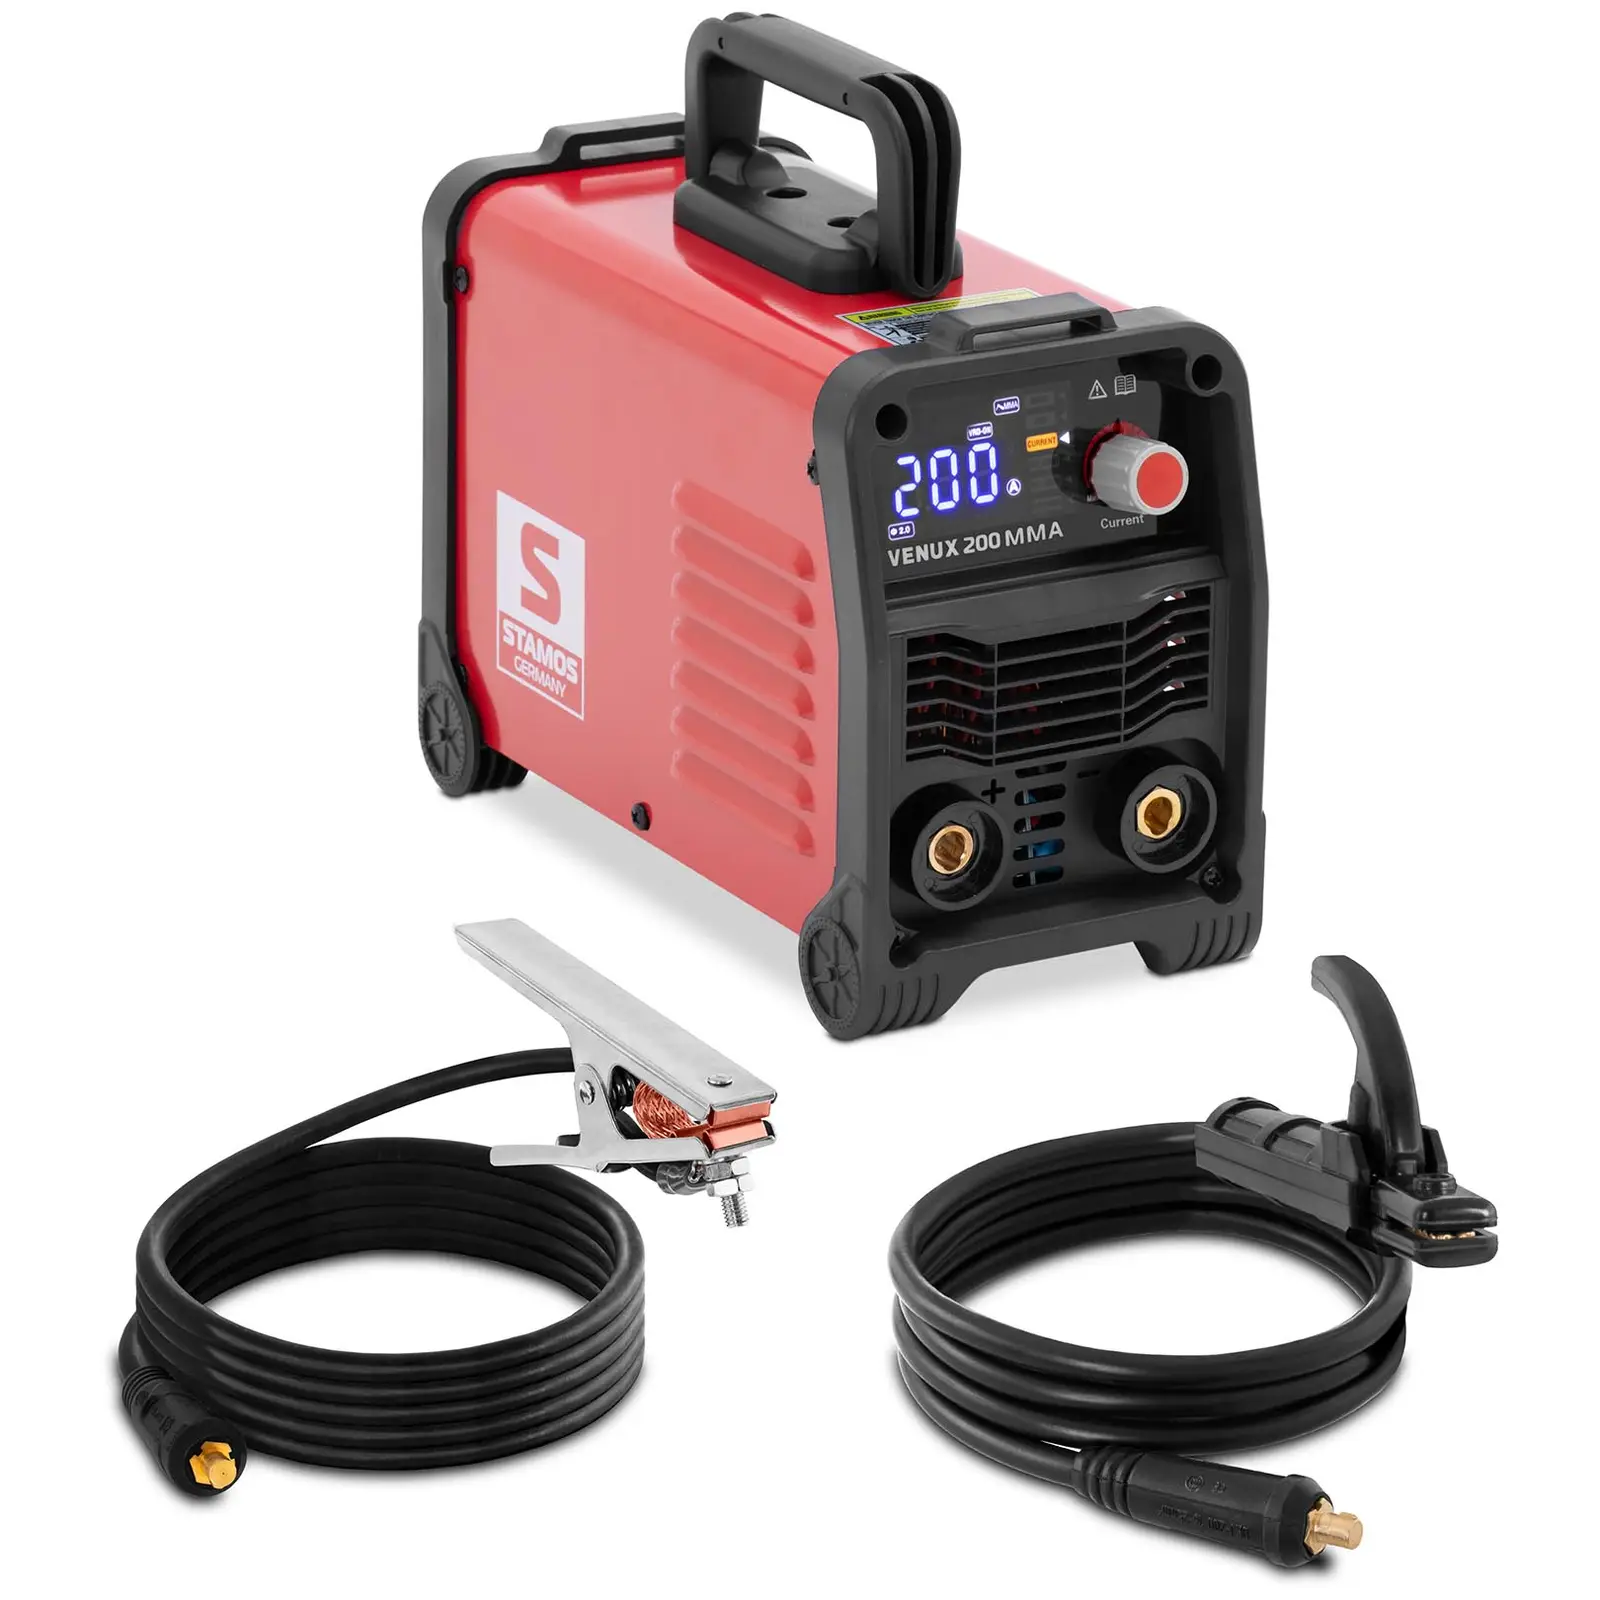 Arc Welder with Smart Select System - TIG Lift-Arc - 200 A - 60 % duty cycle - Hot Start - Arc Force - anti-stick - VRD